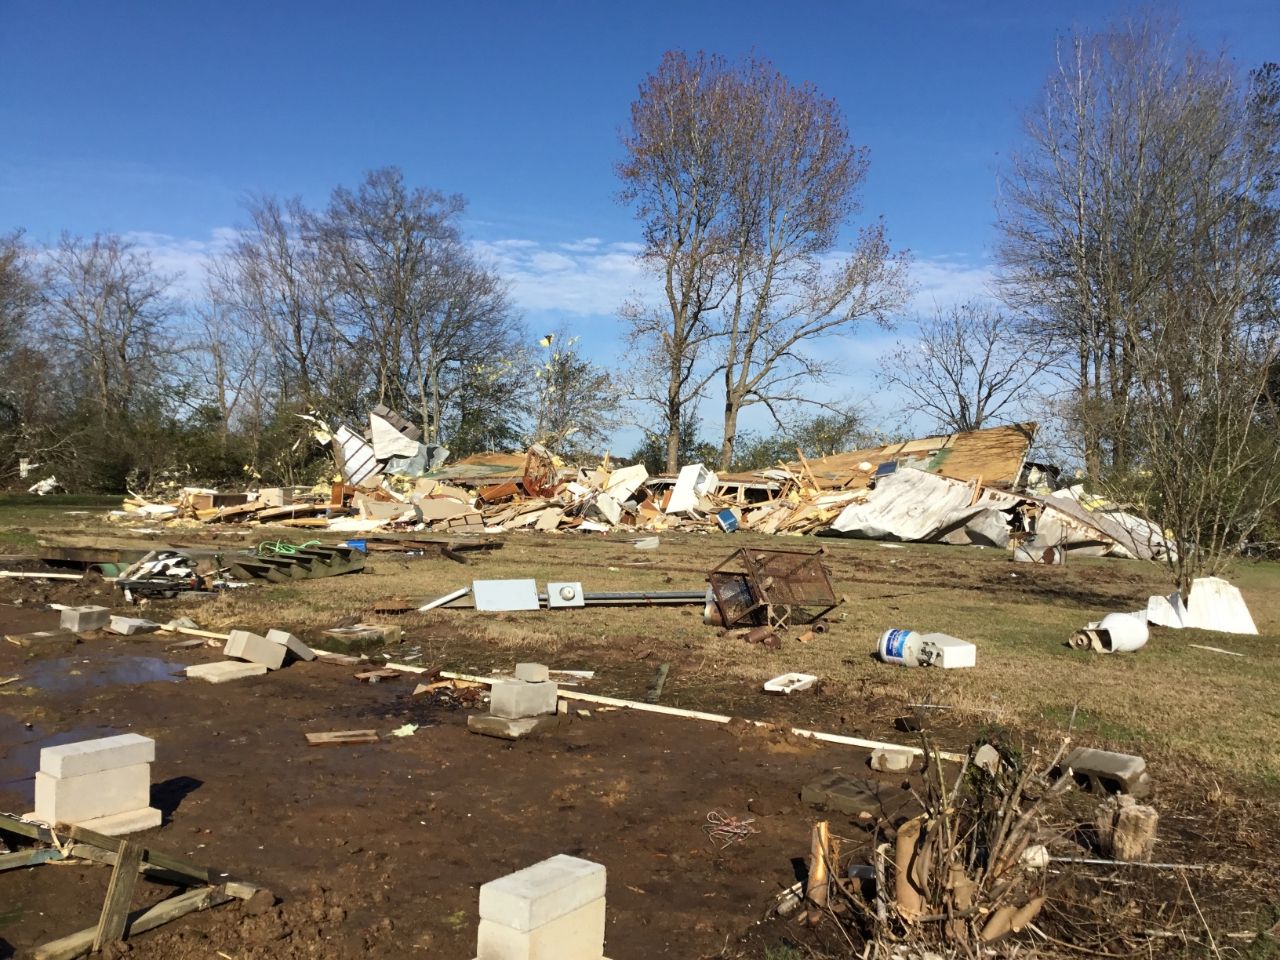 This mobile home was destroyed in the Baskin EF-2 tornado